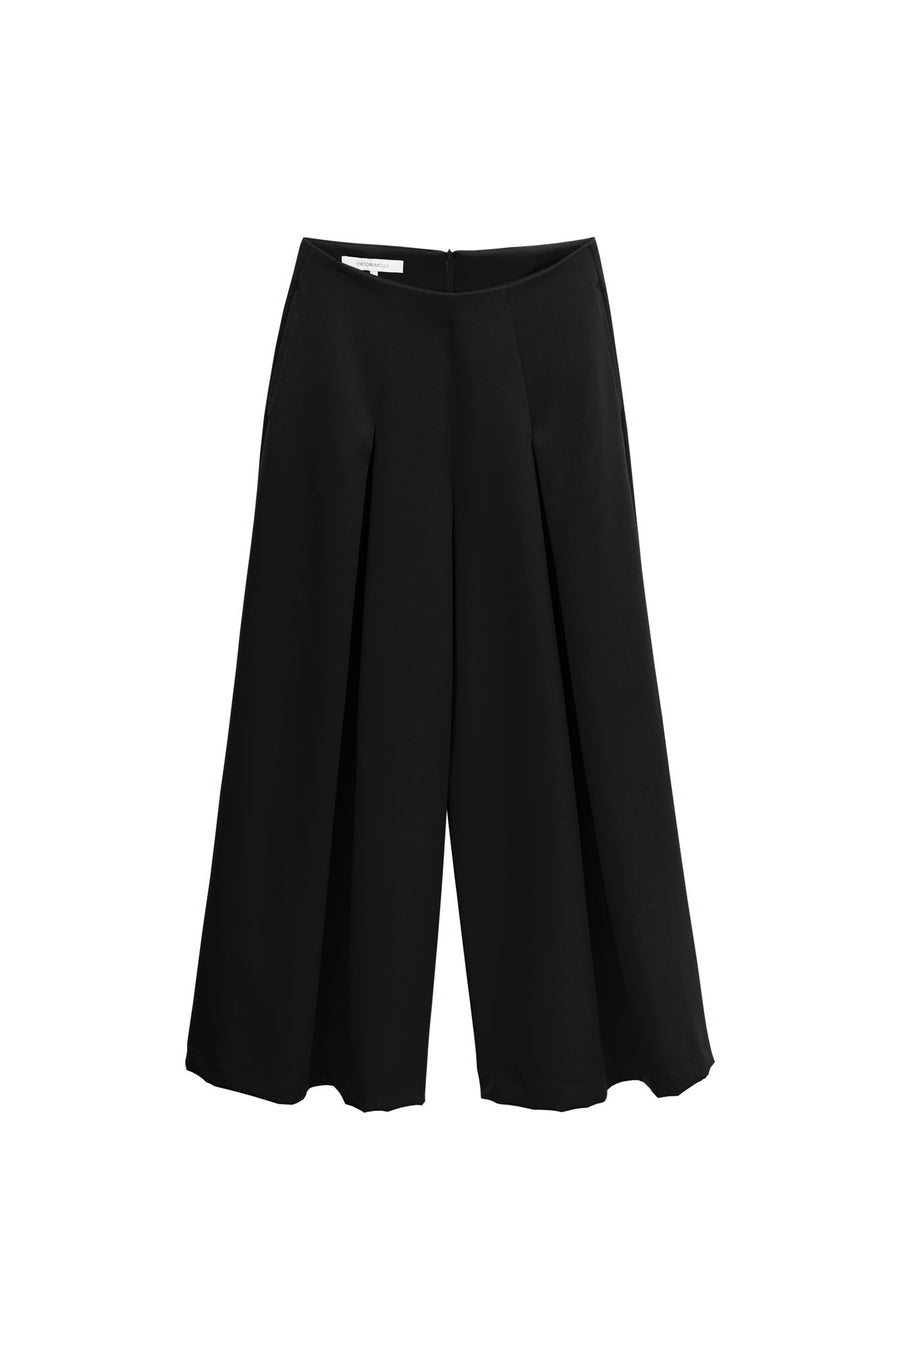 THE TAILORED PANTS BLACK